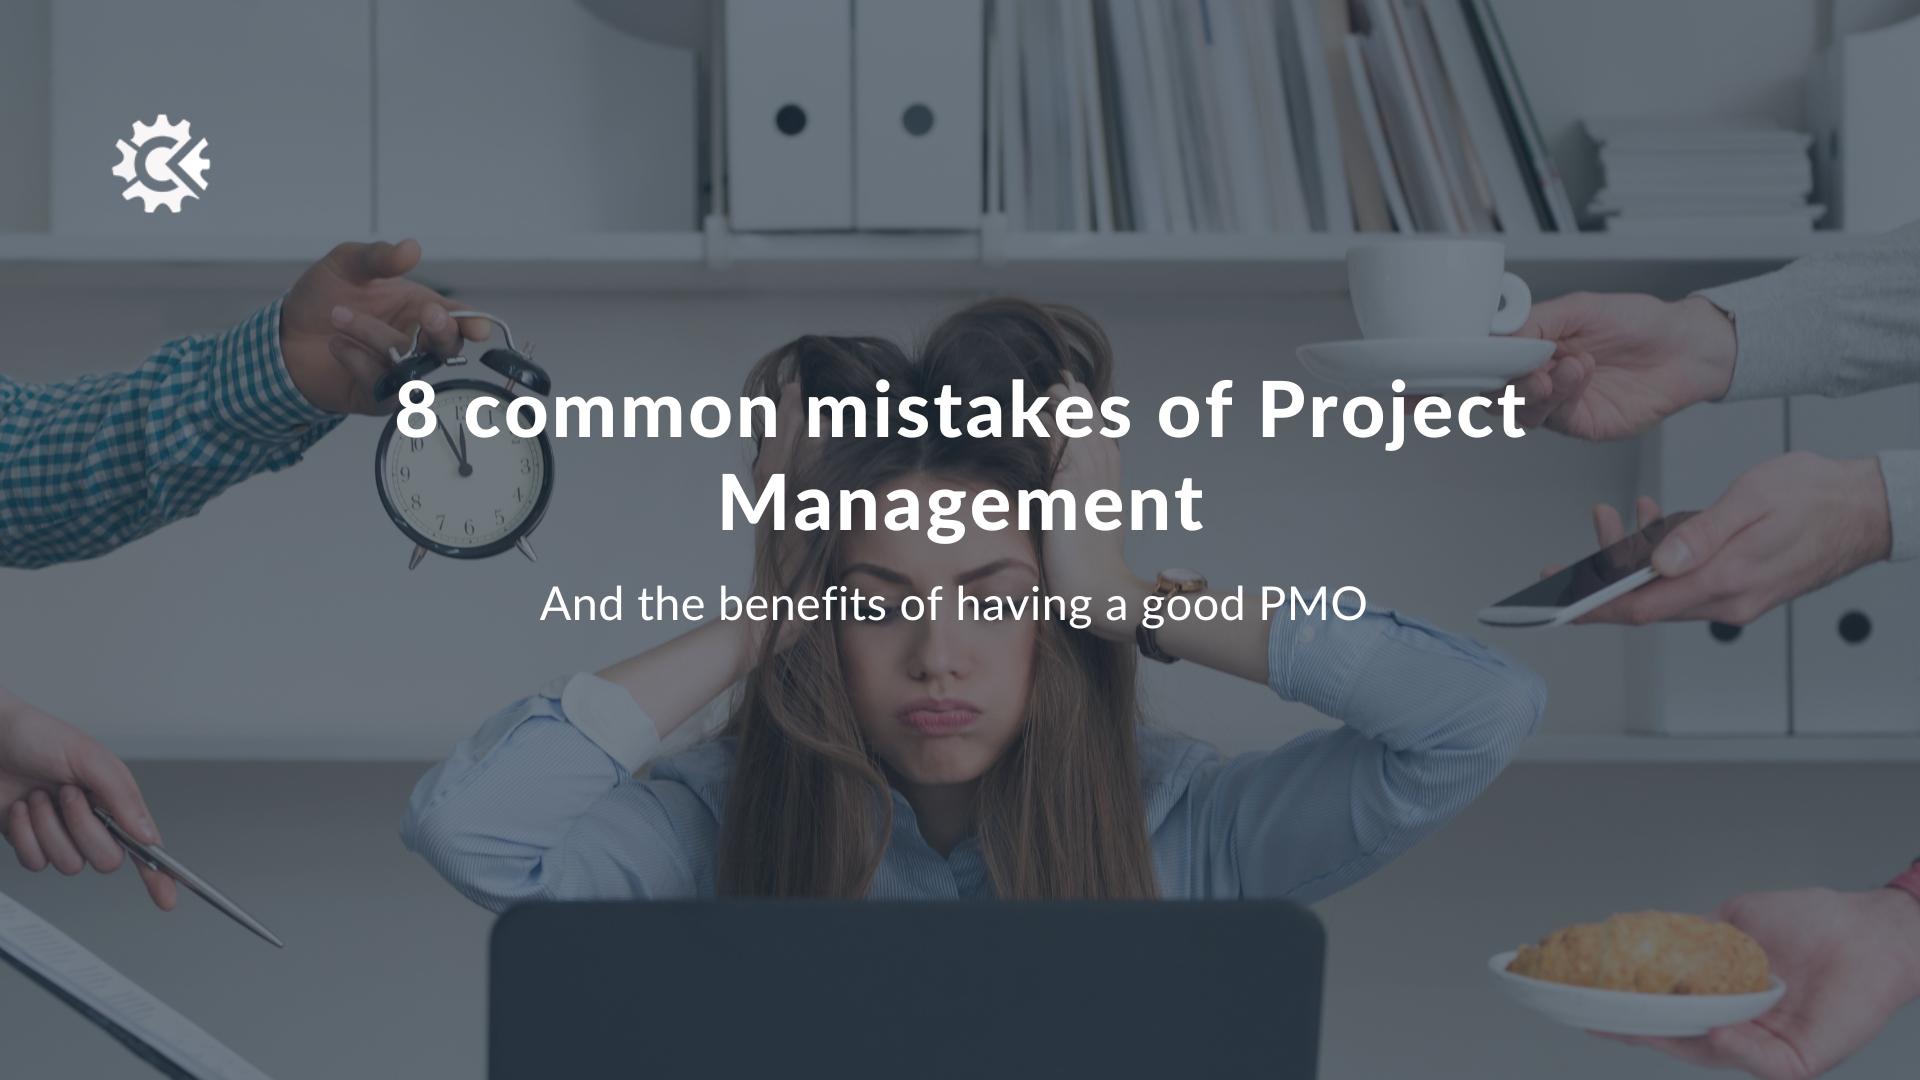 Blog 8 PM mistakes and the benefits of a good PMO